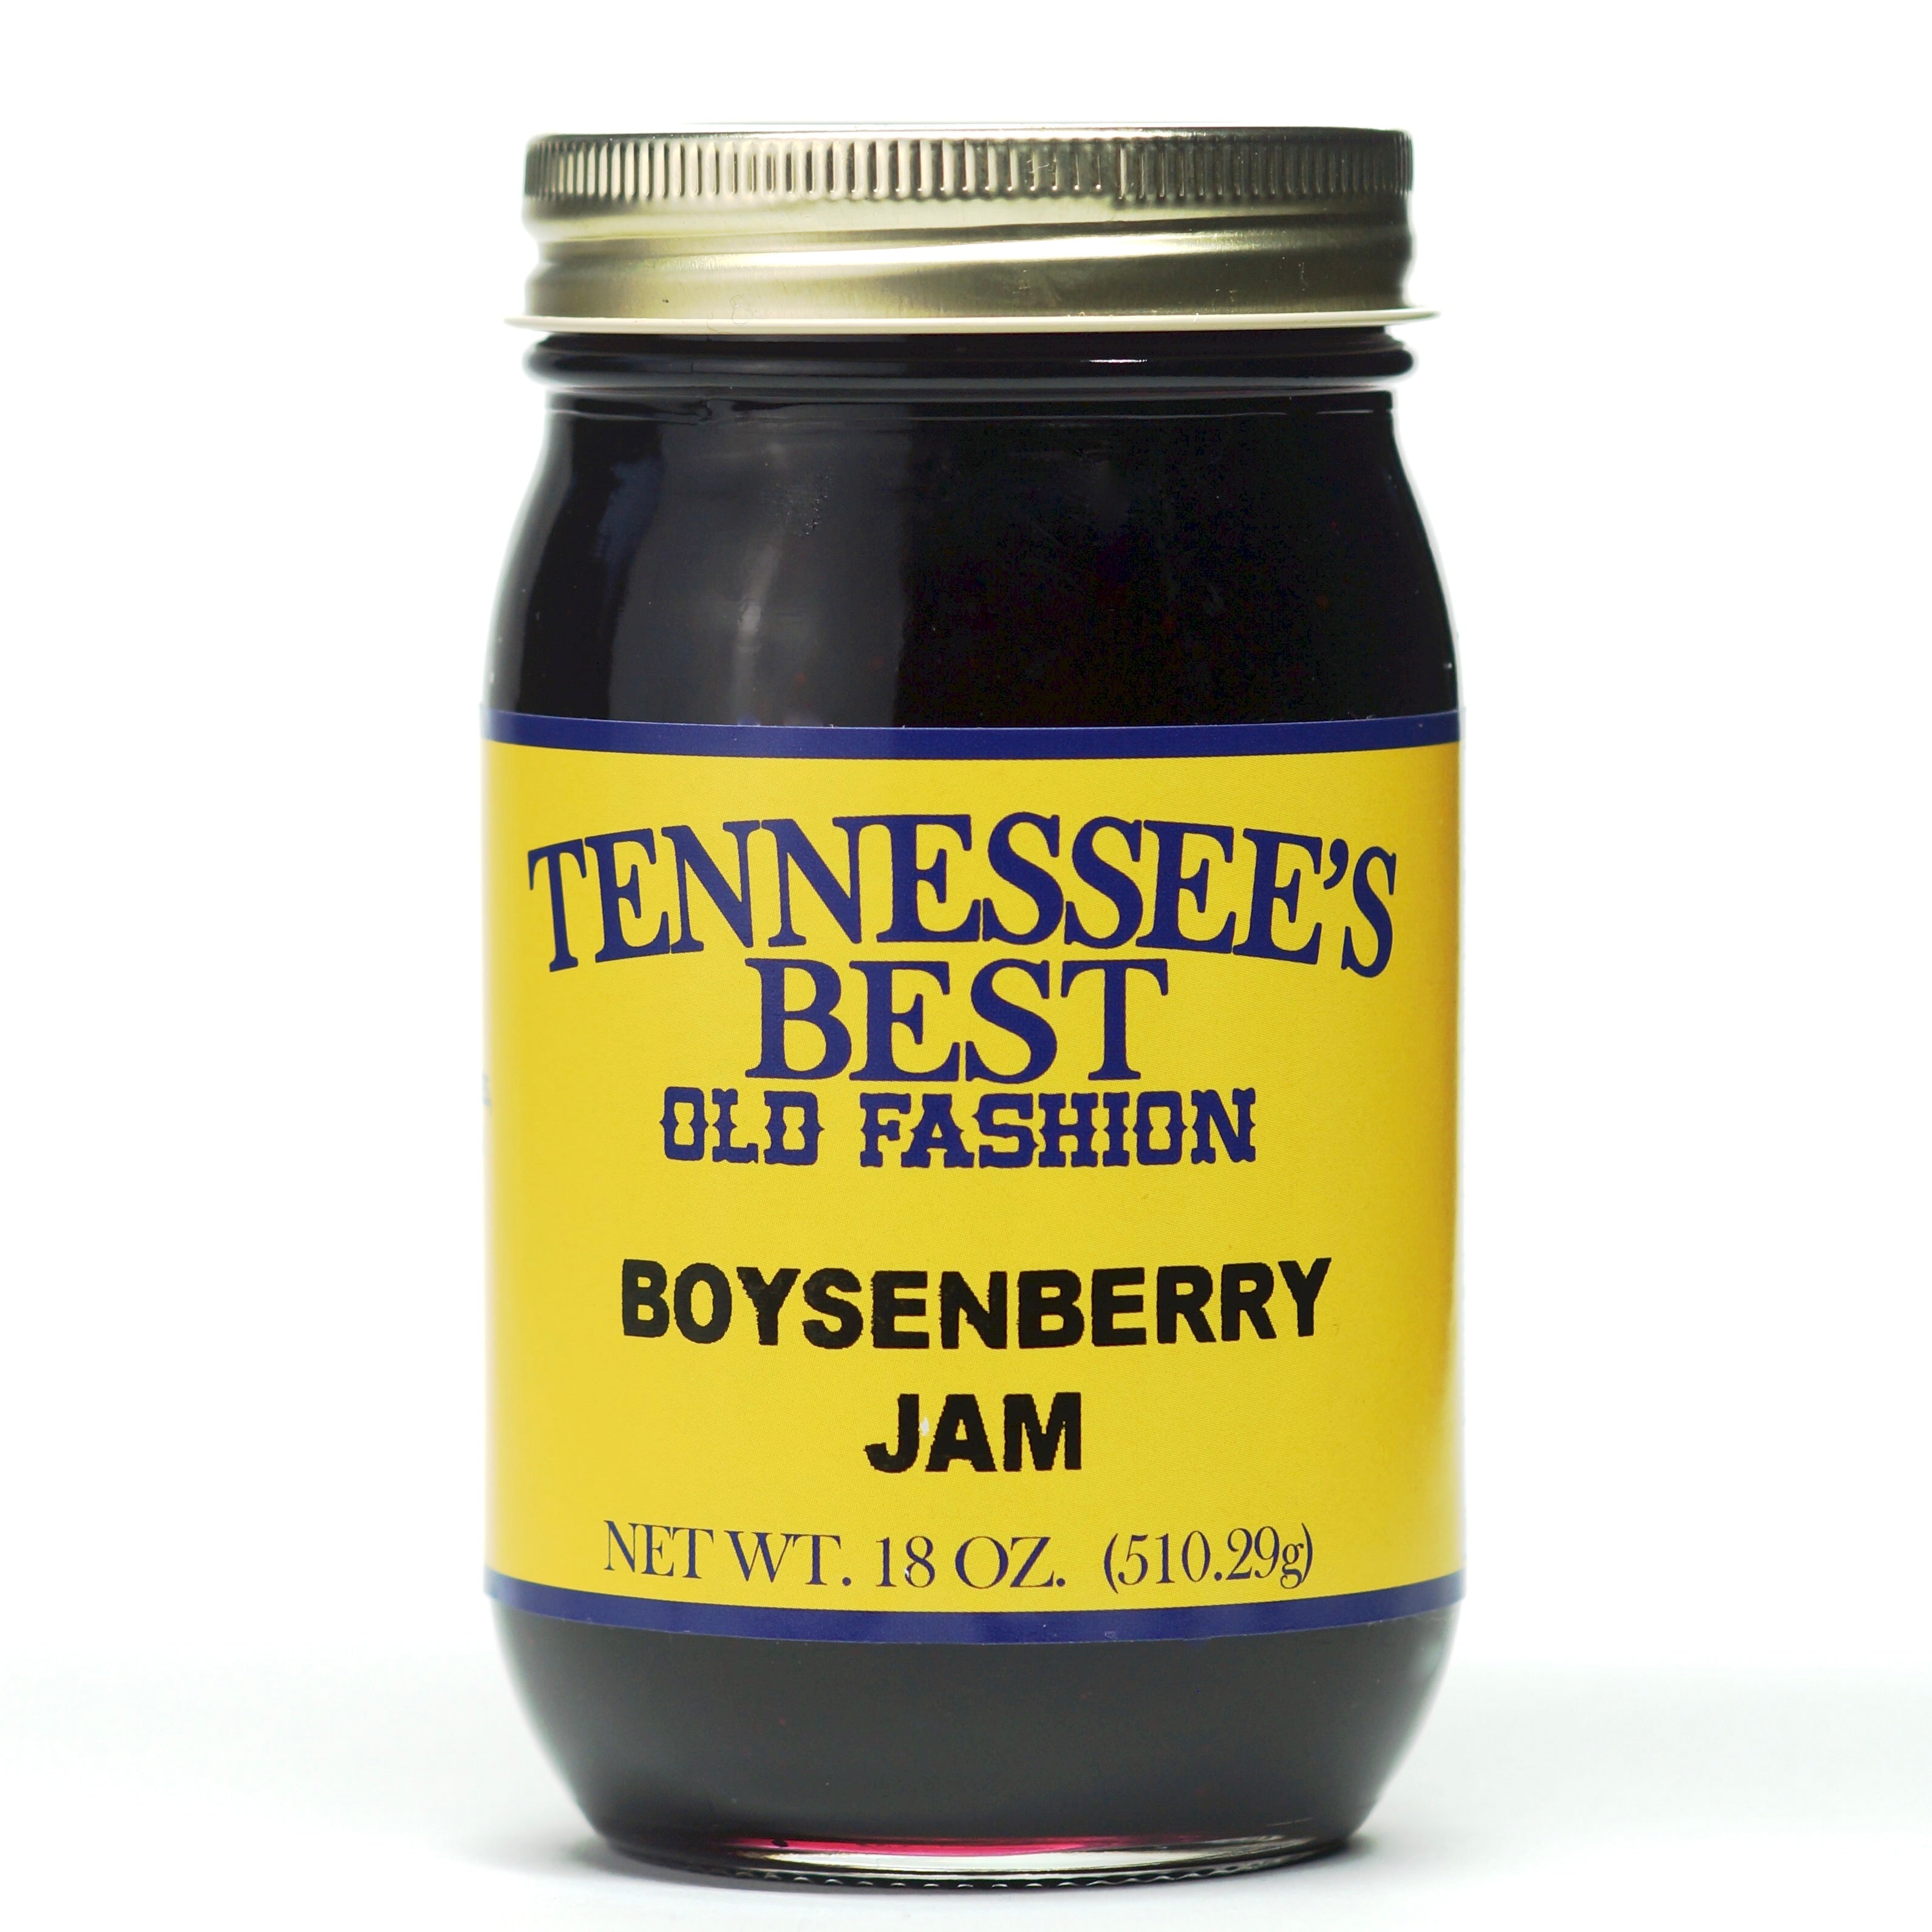 Tennessee's Best Old Fashion Style Jams 18 oz